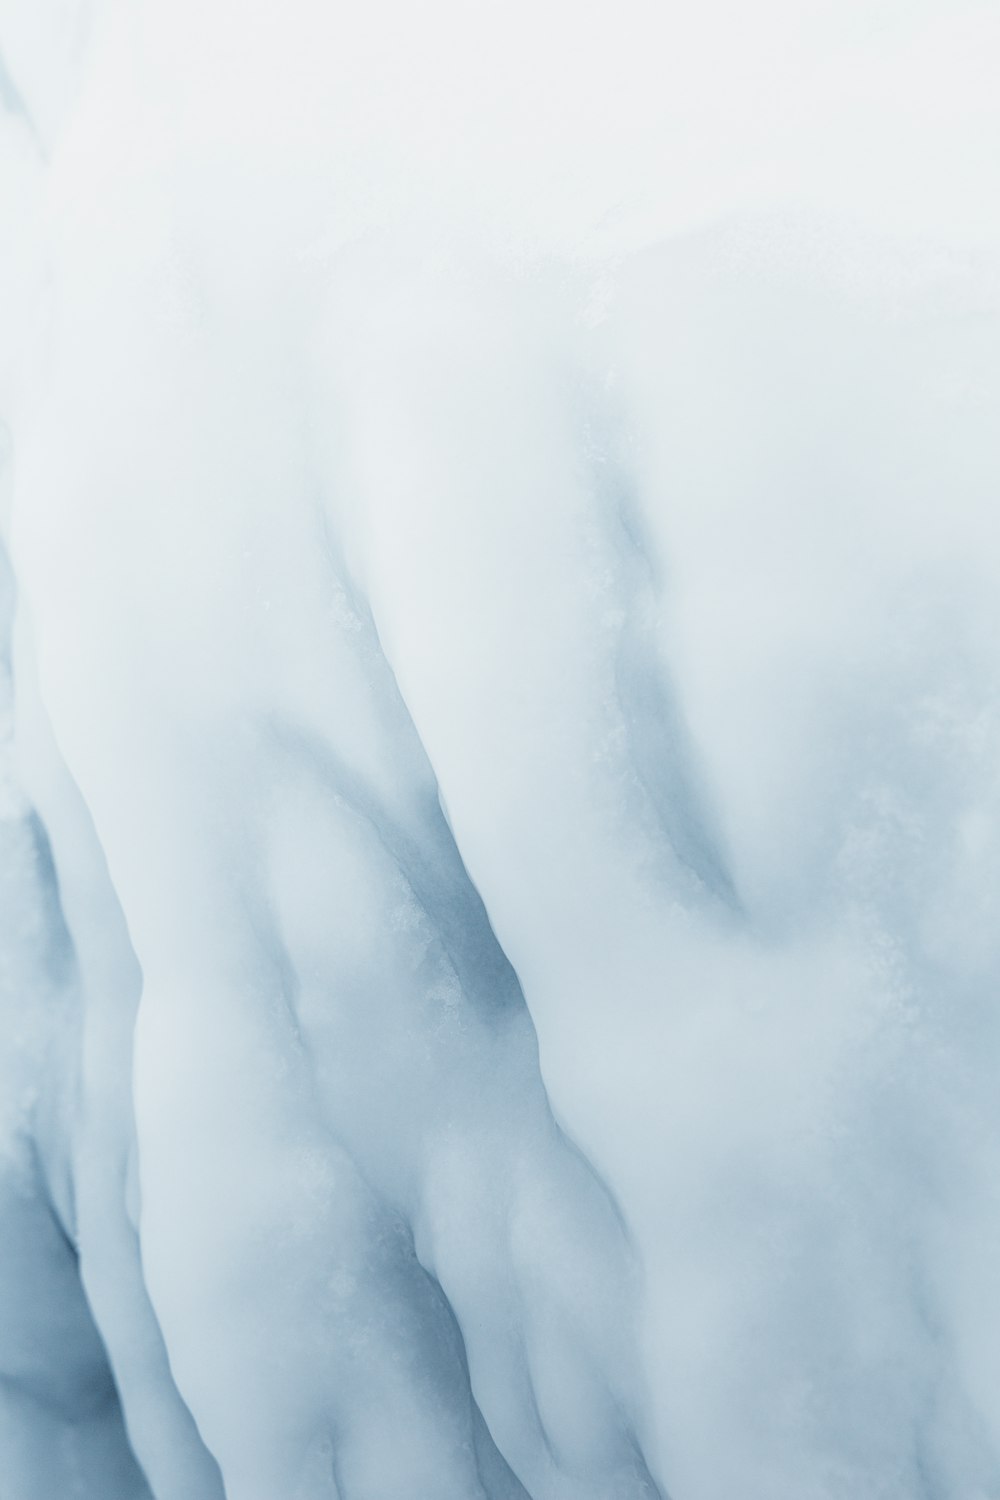 a large iceberg with snow on it's sides